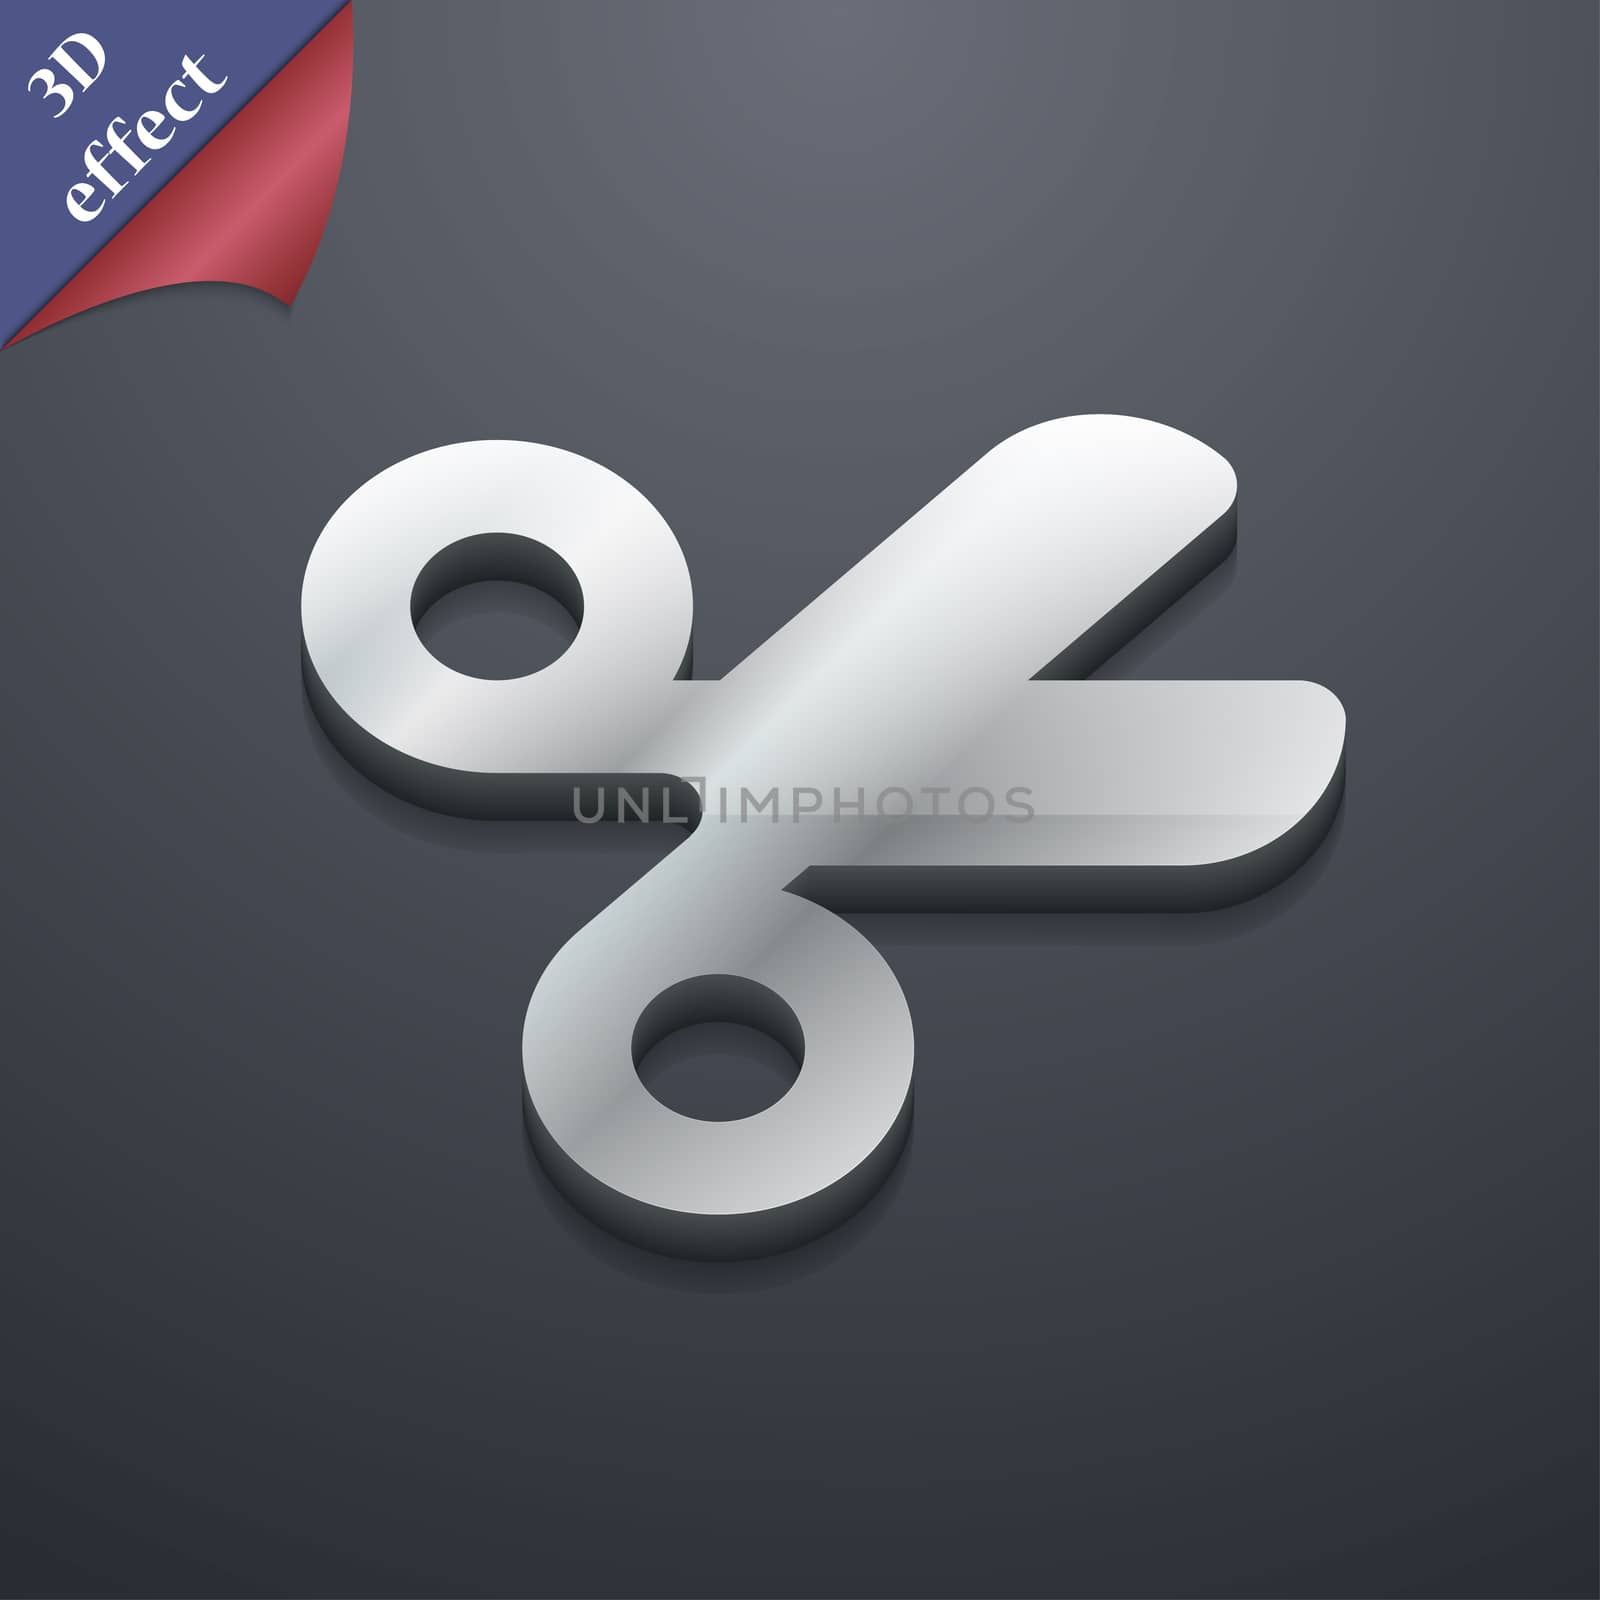 Scissors hairdresser, Tailor icon symbol. 3D style. Trendy, modern design with space for your text illustration. Rastrized copy